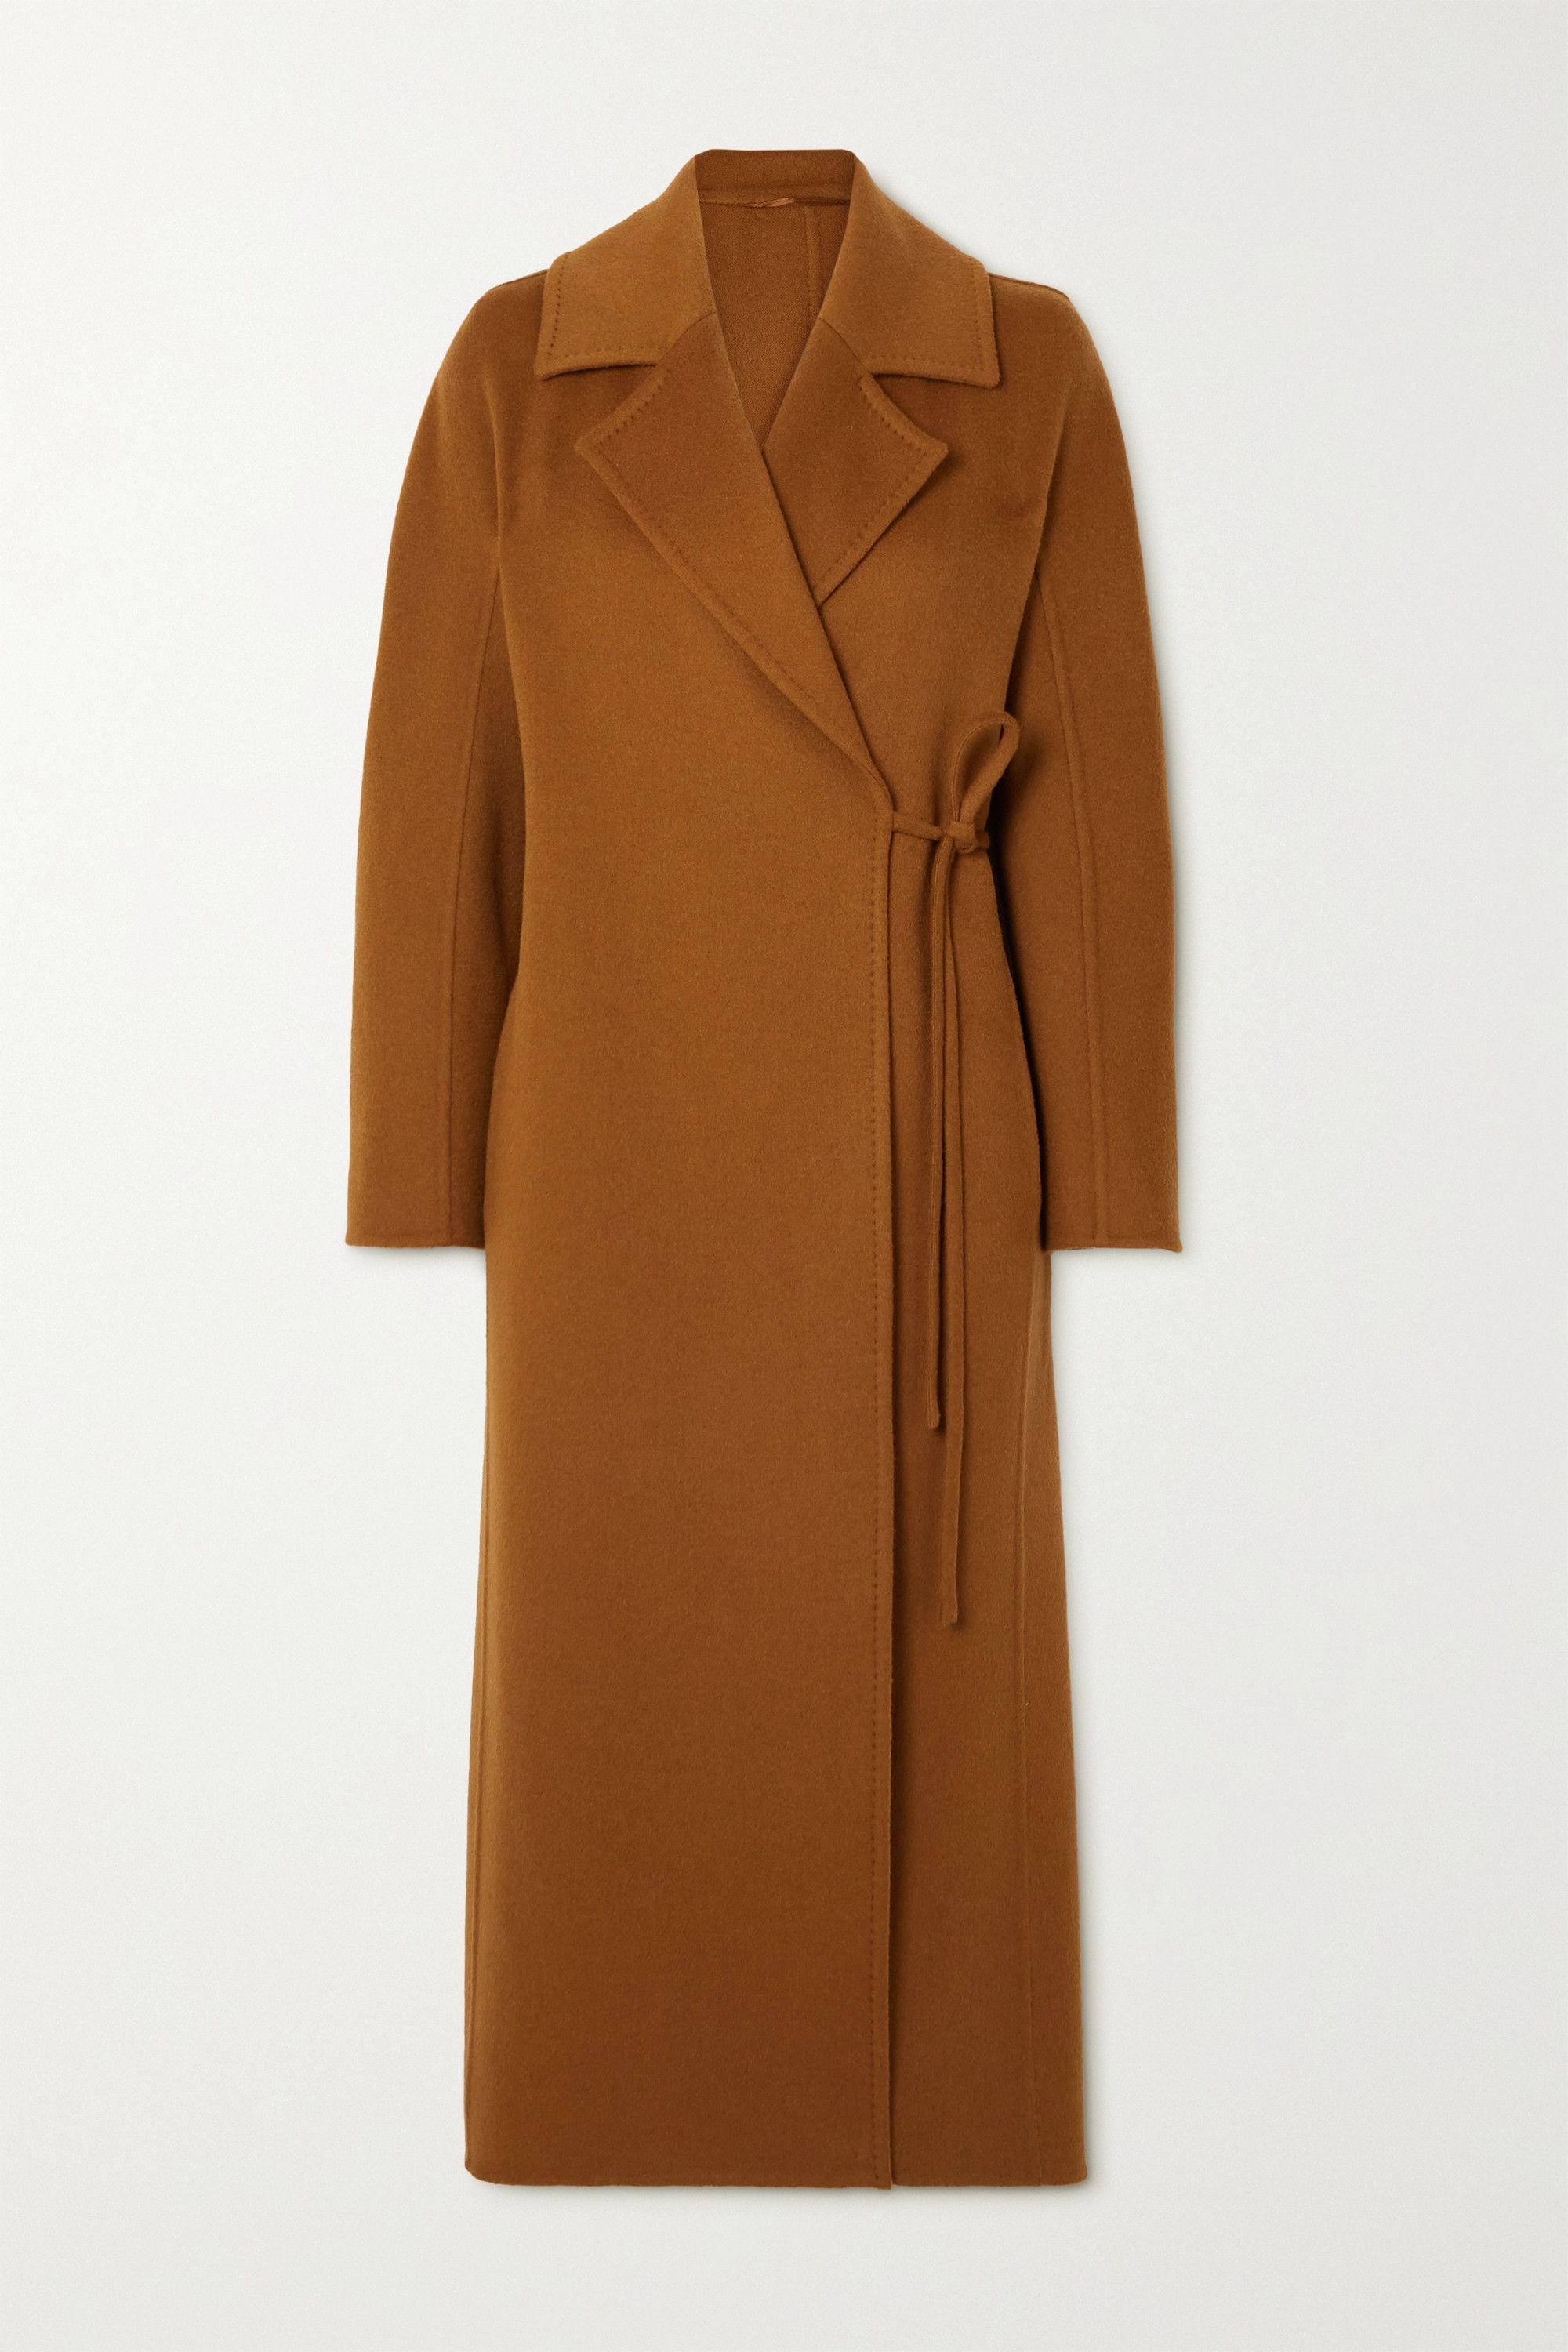 42 Of The Best Camel Coats To Buy Now